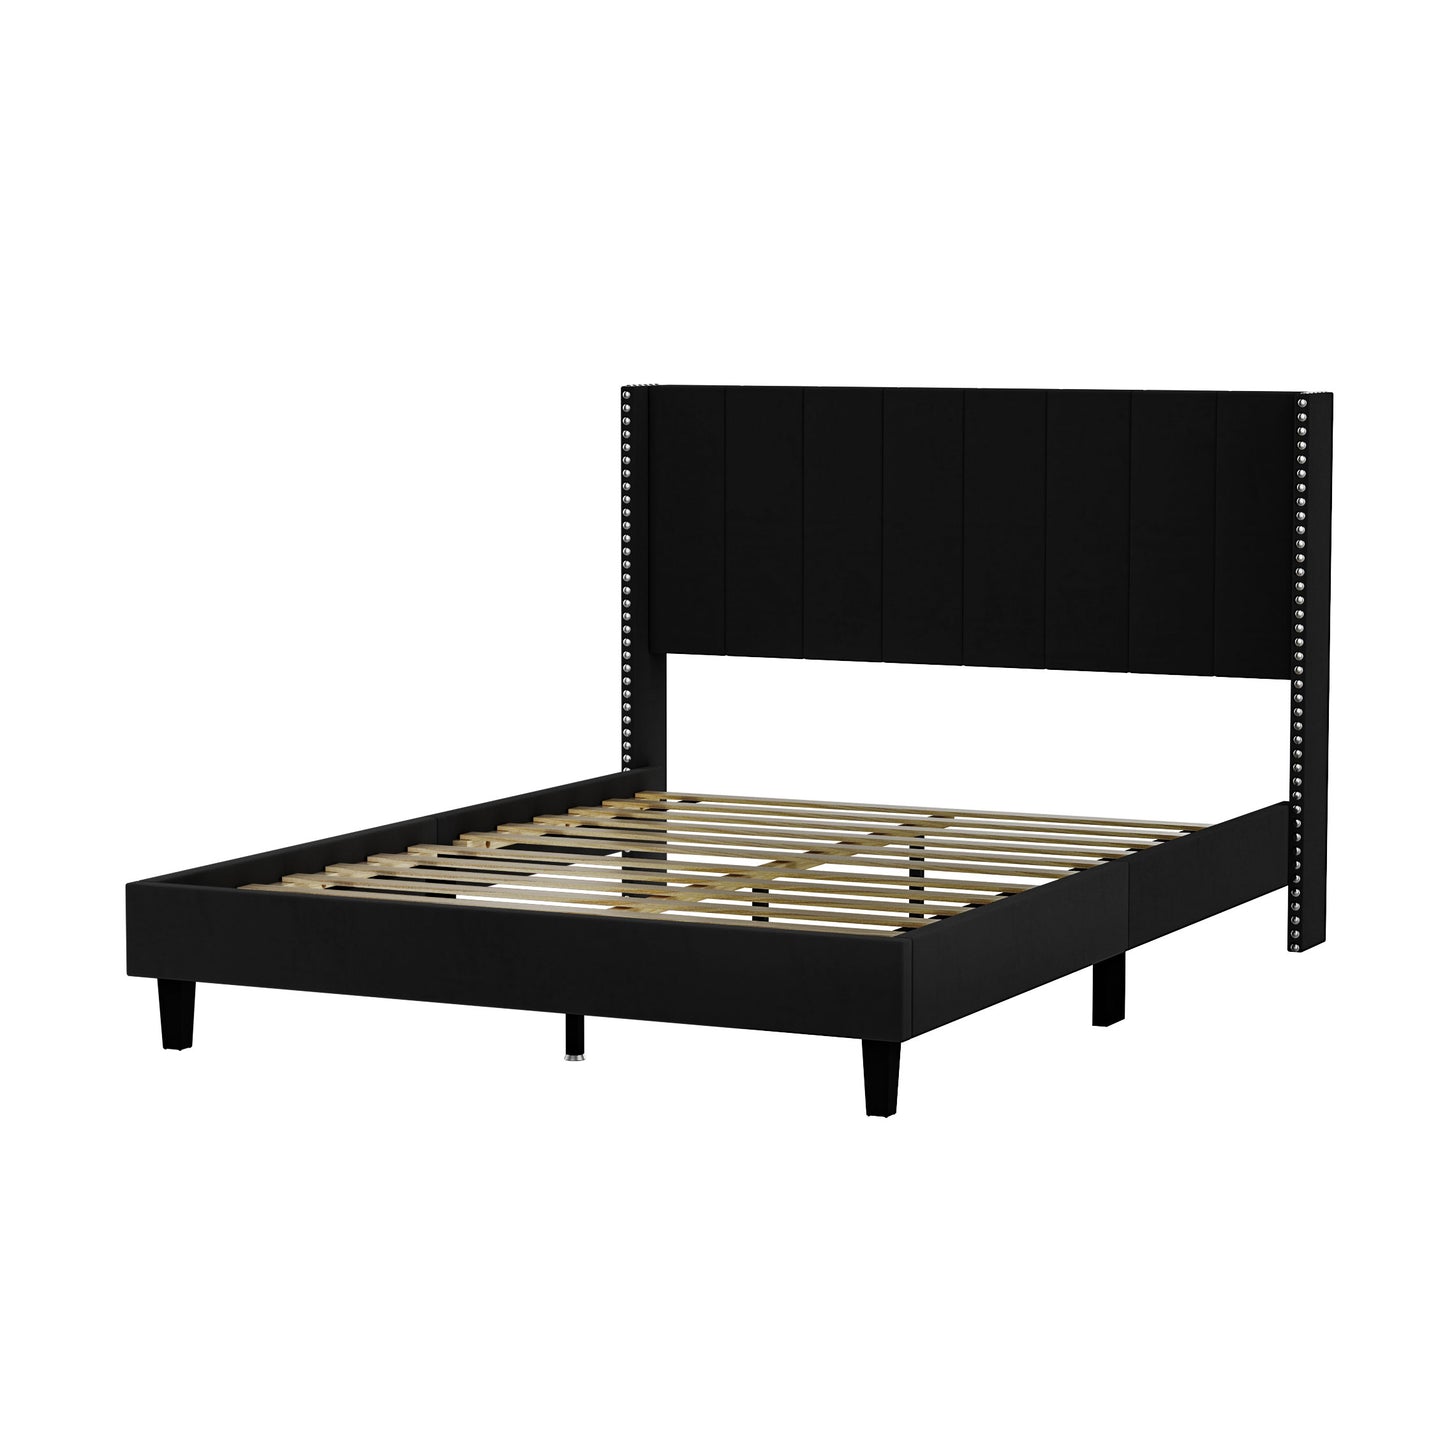 Queen Size Tufted Upholstered Bed Frame